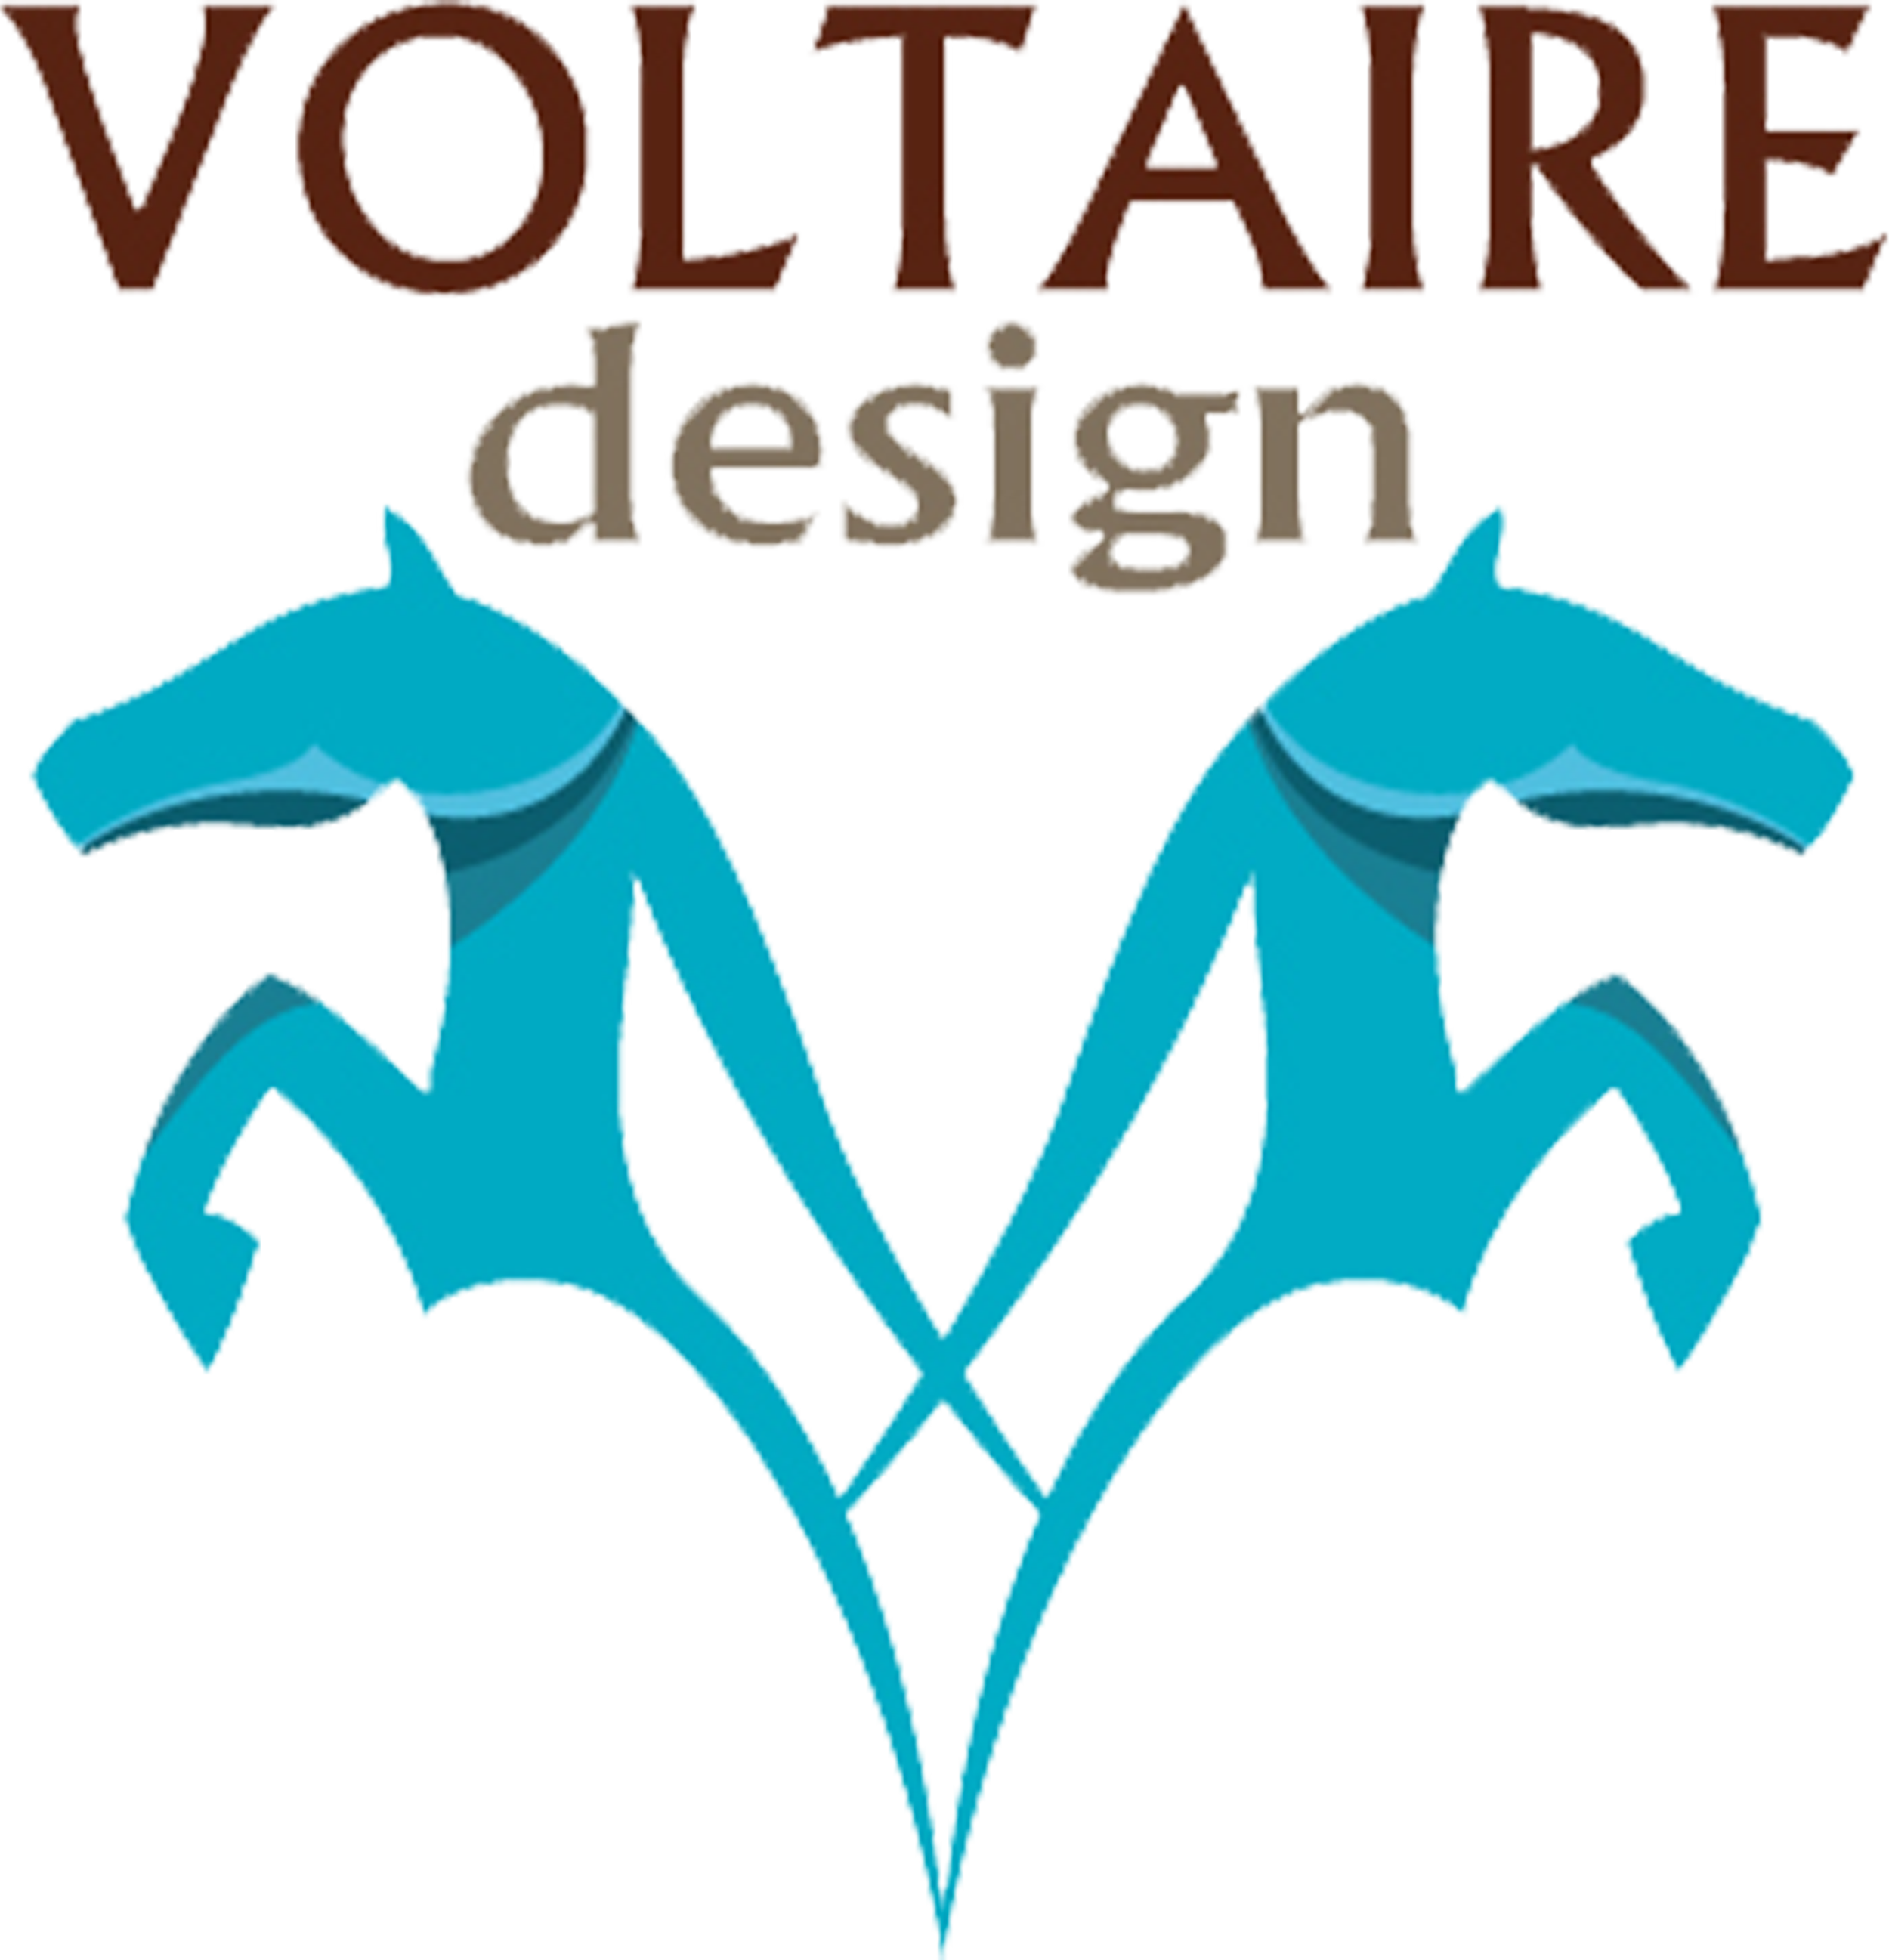 Voltaire-Logo.jpg.png